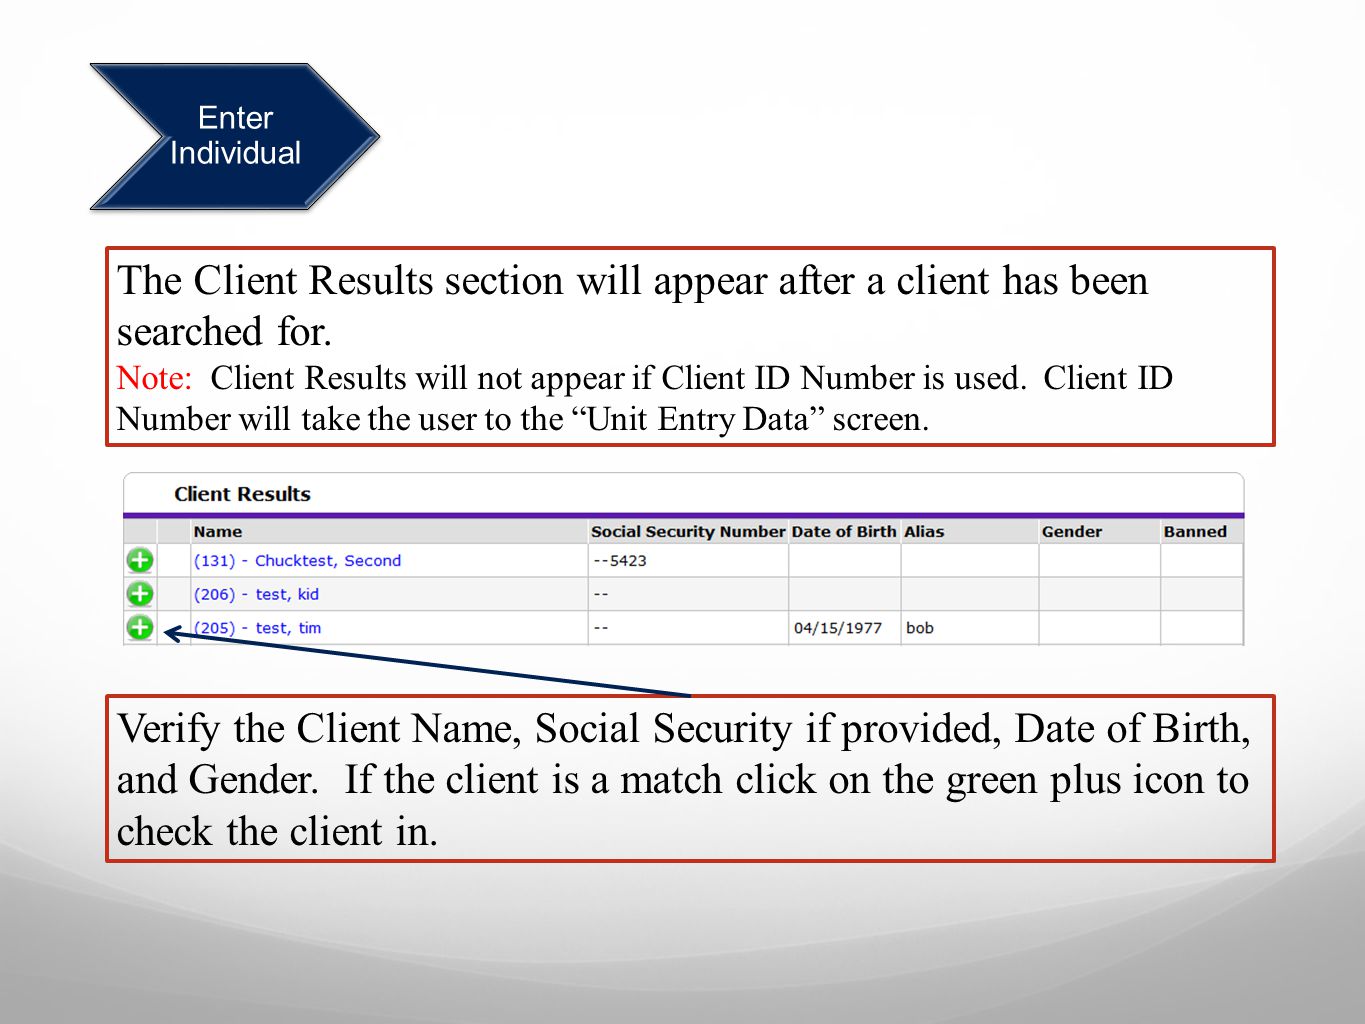 Enter Individual The Client Results section will appear after a client has been searched for.